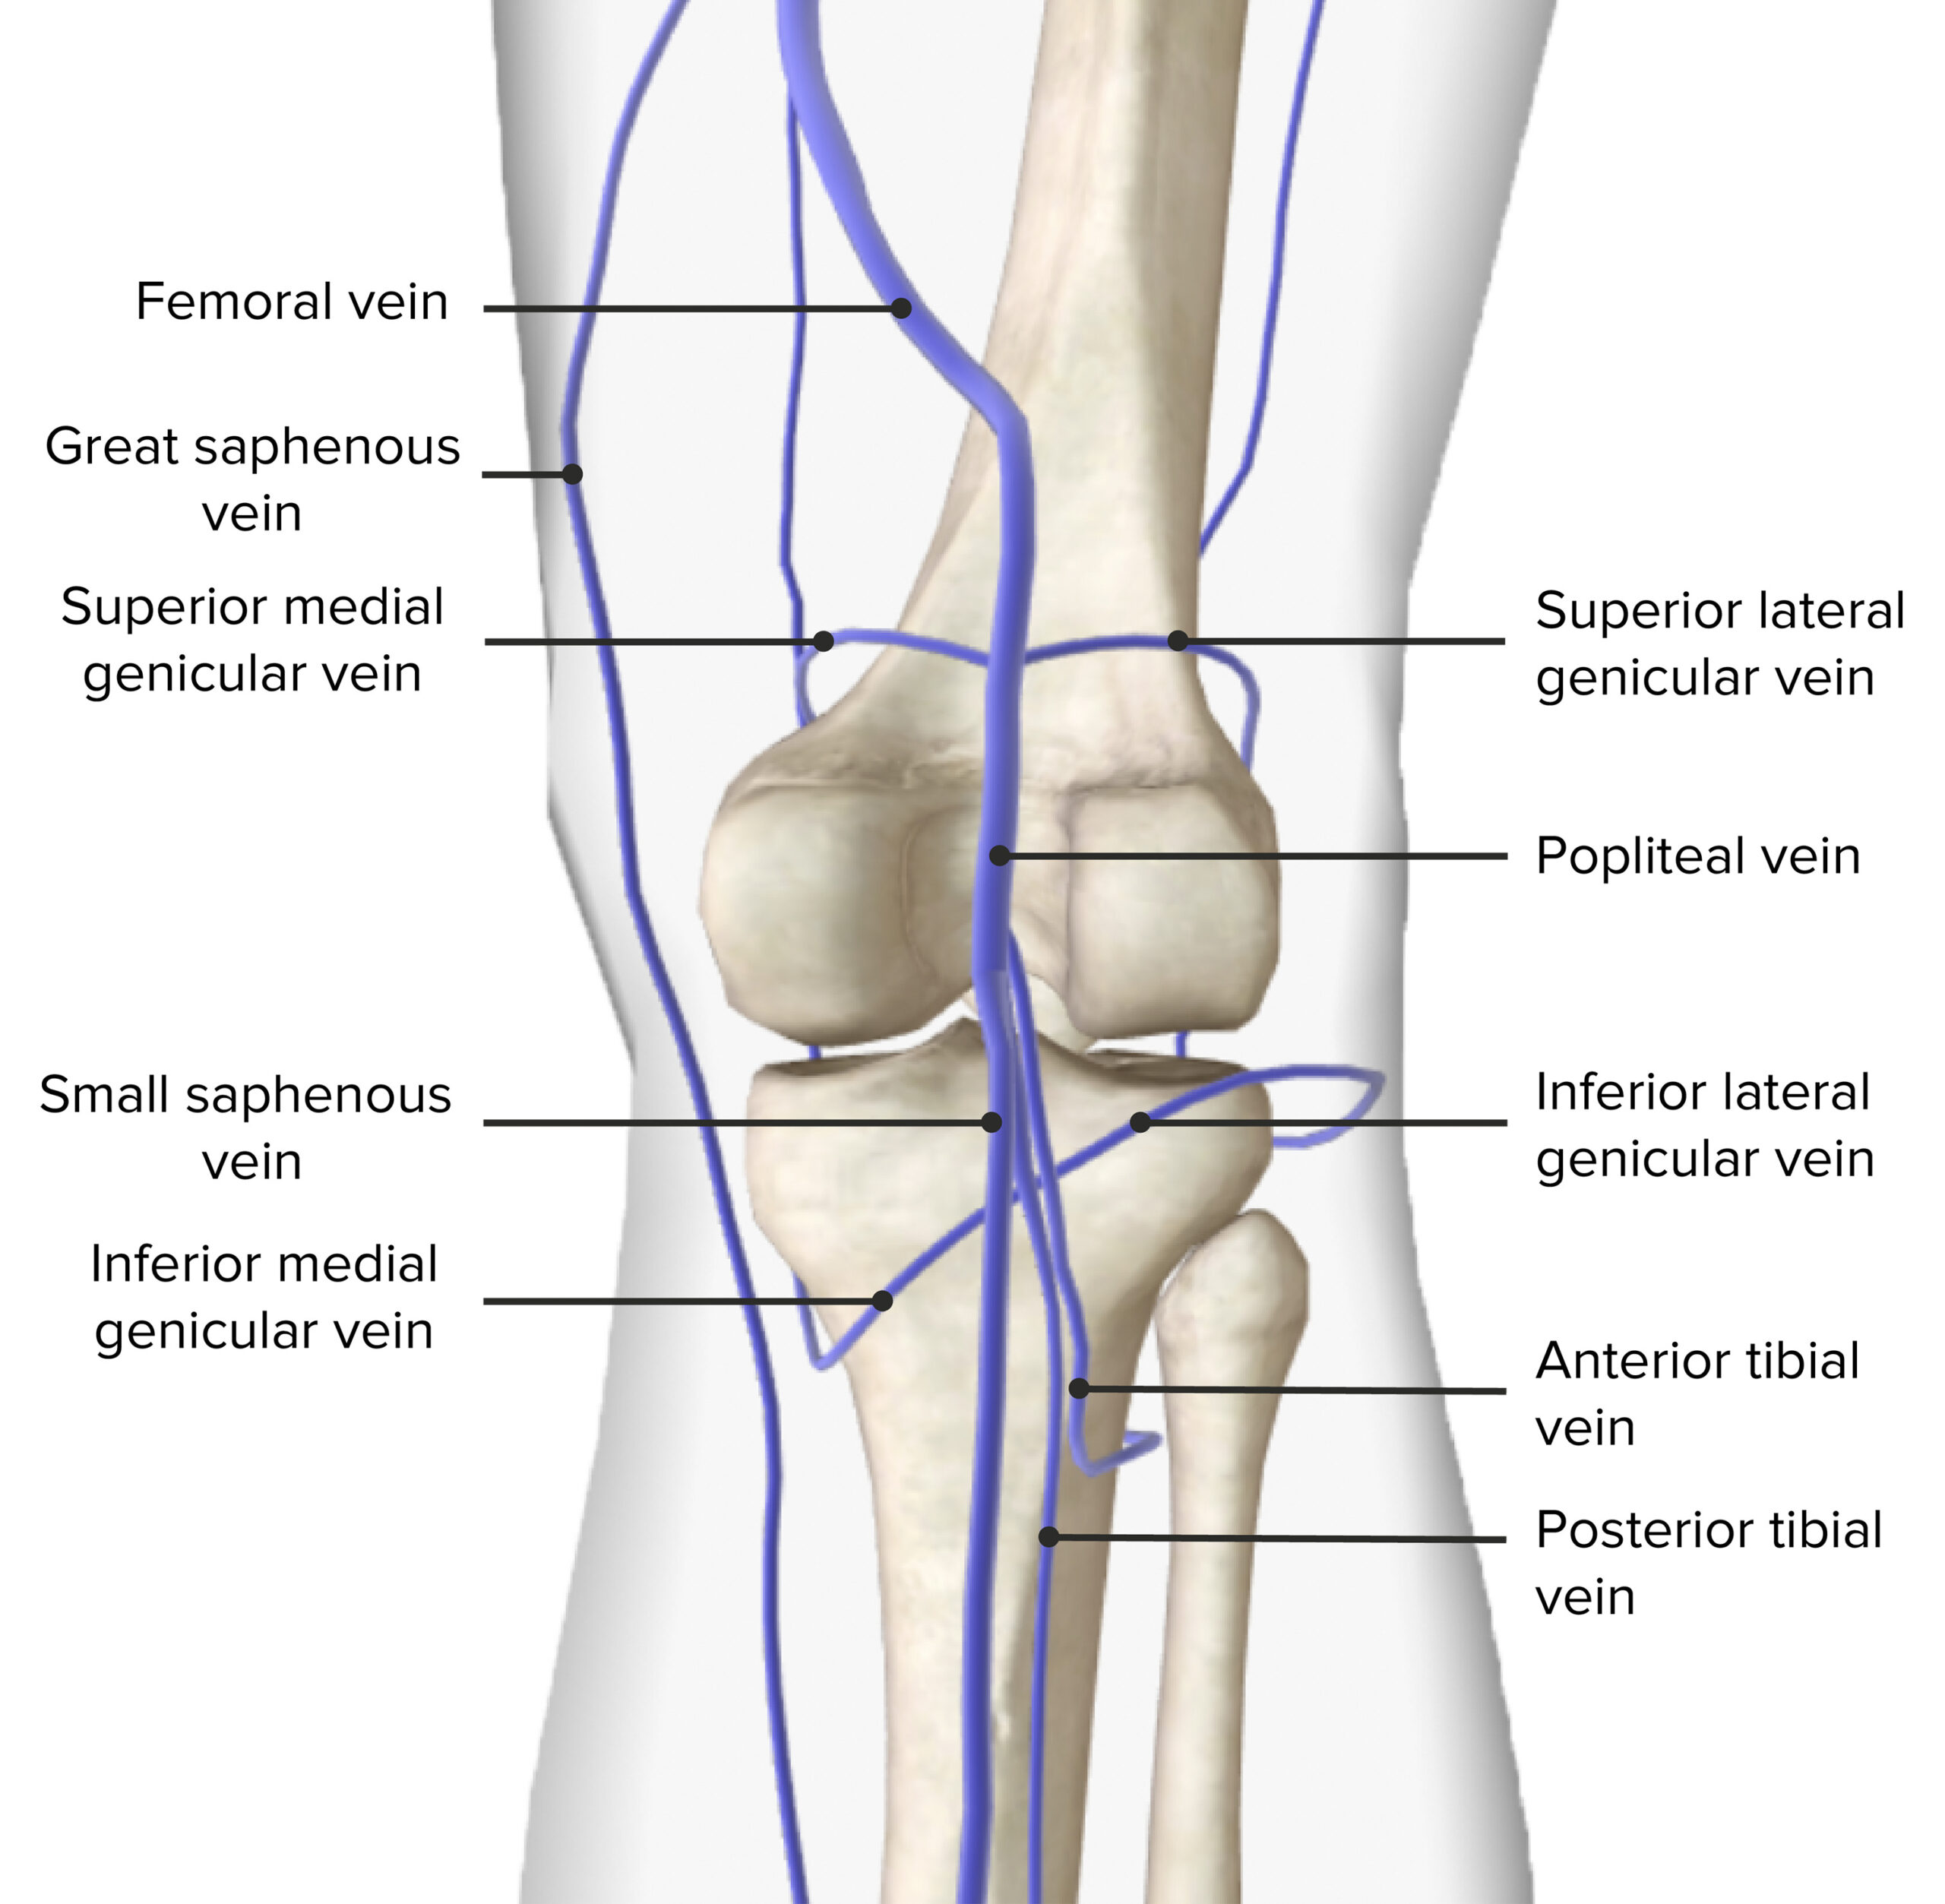 Popliteal Fossa: Anatomy | Concise Medical Knowledge